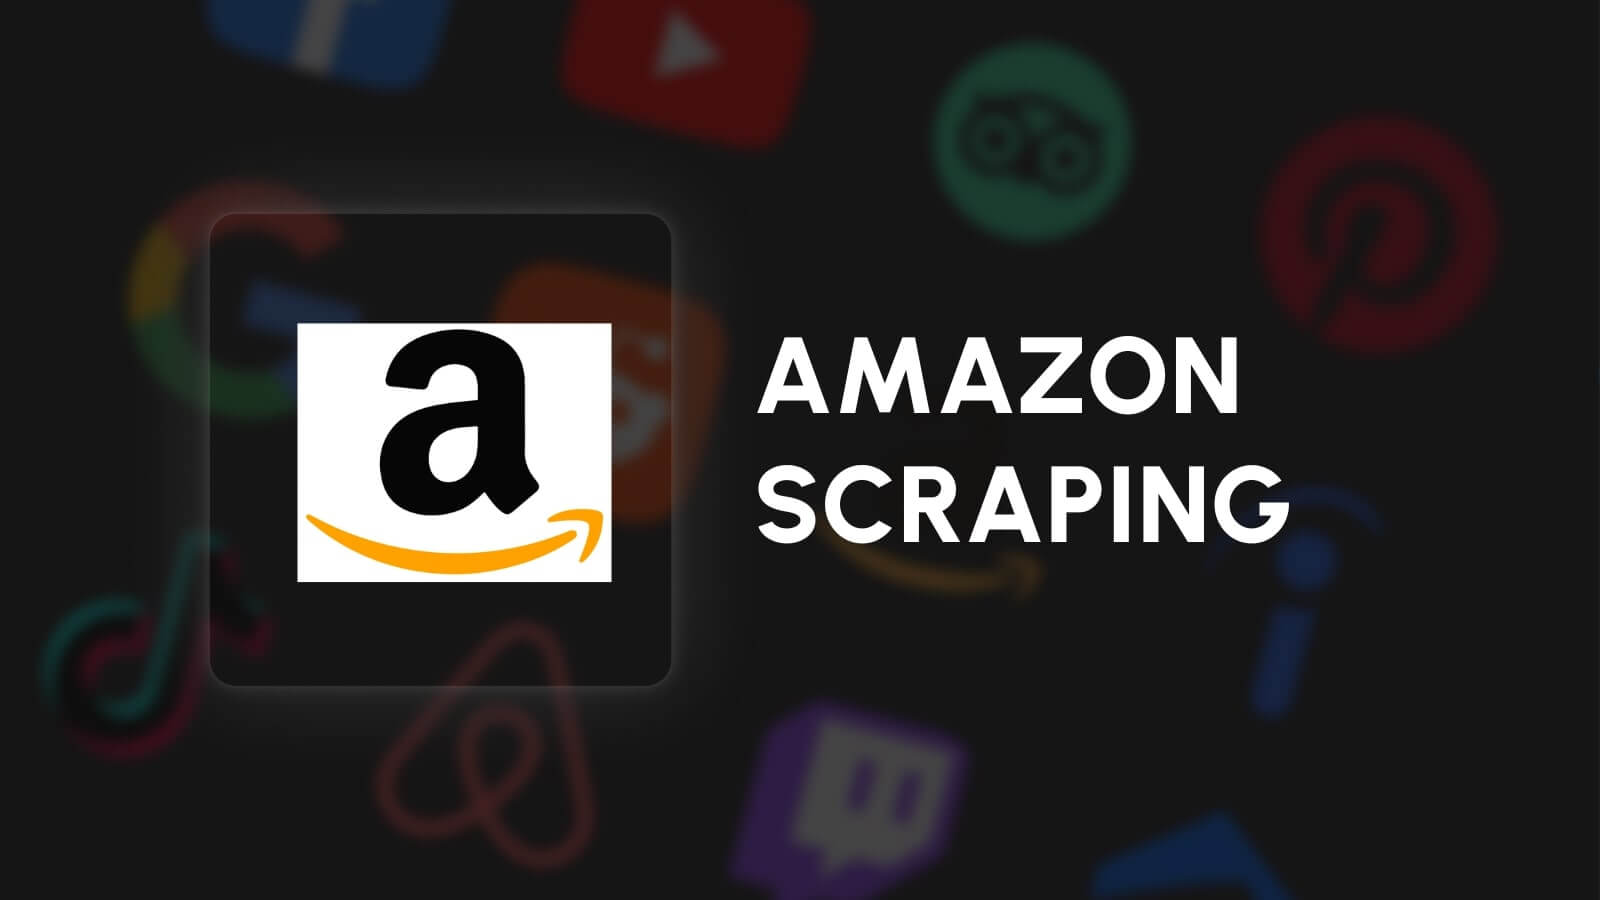 Web Scraping Amazon: step-by-step tutorial with Python